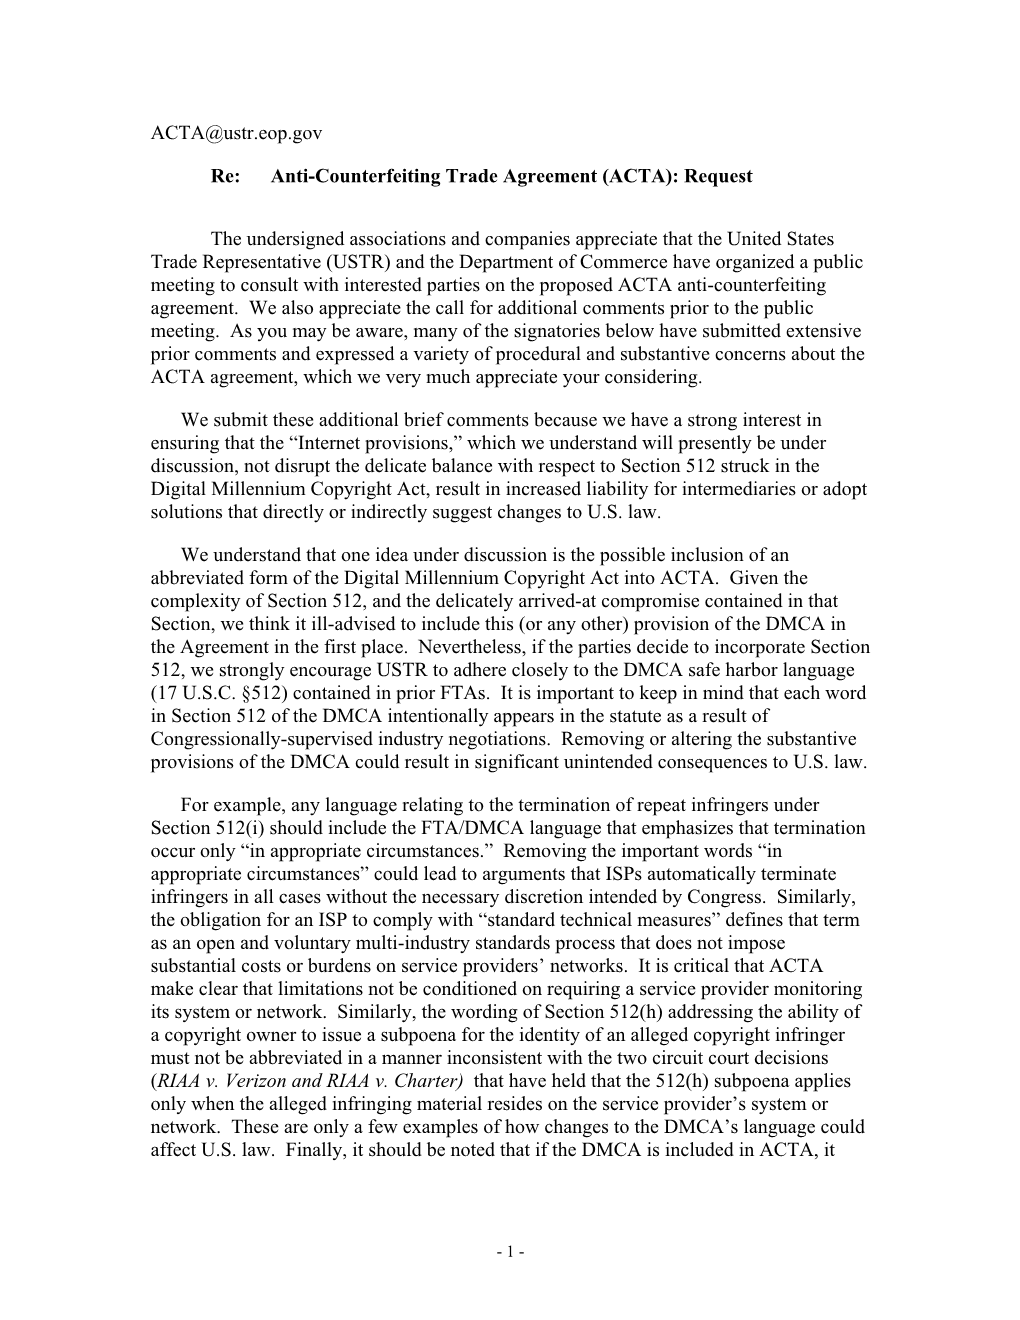 Anti-Counterfeiting Trade Agreement (ACTA): Request